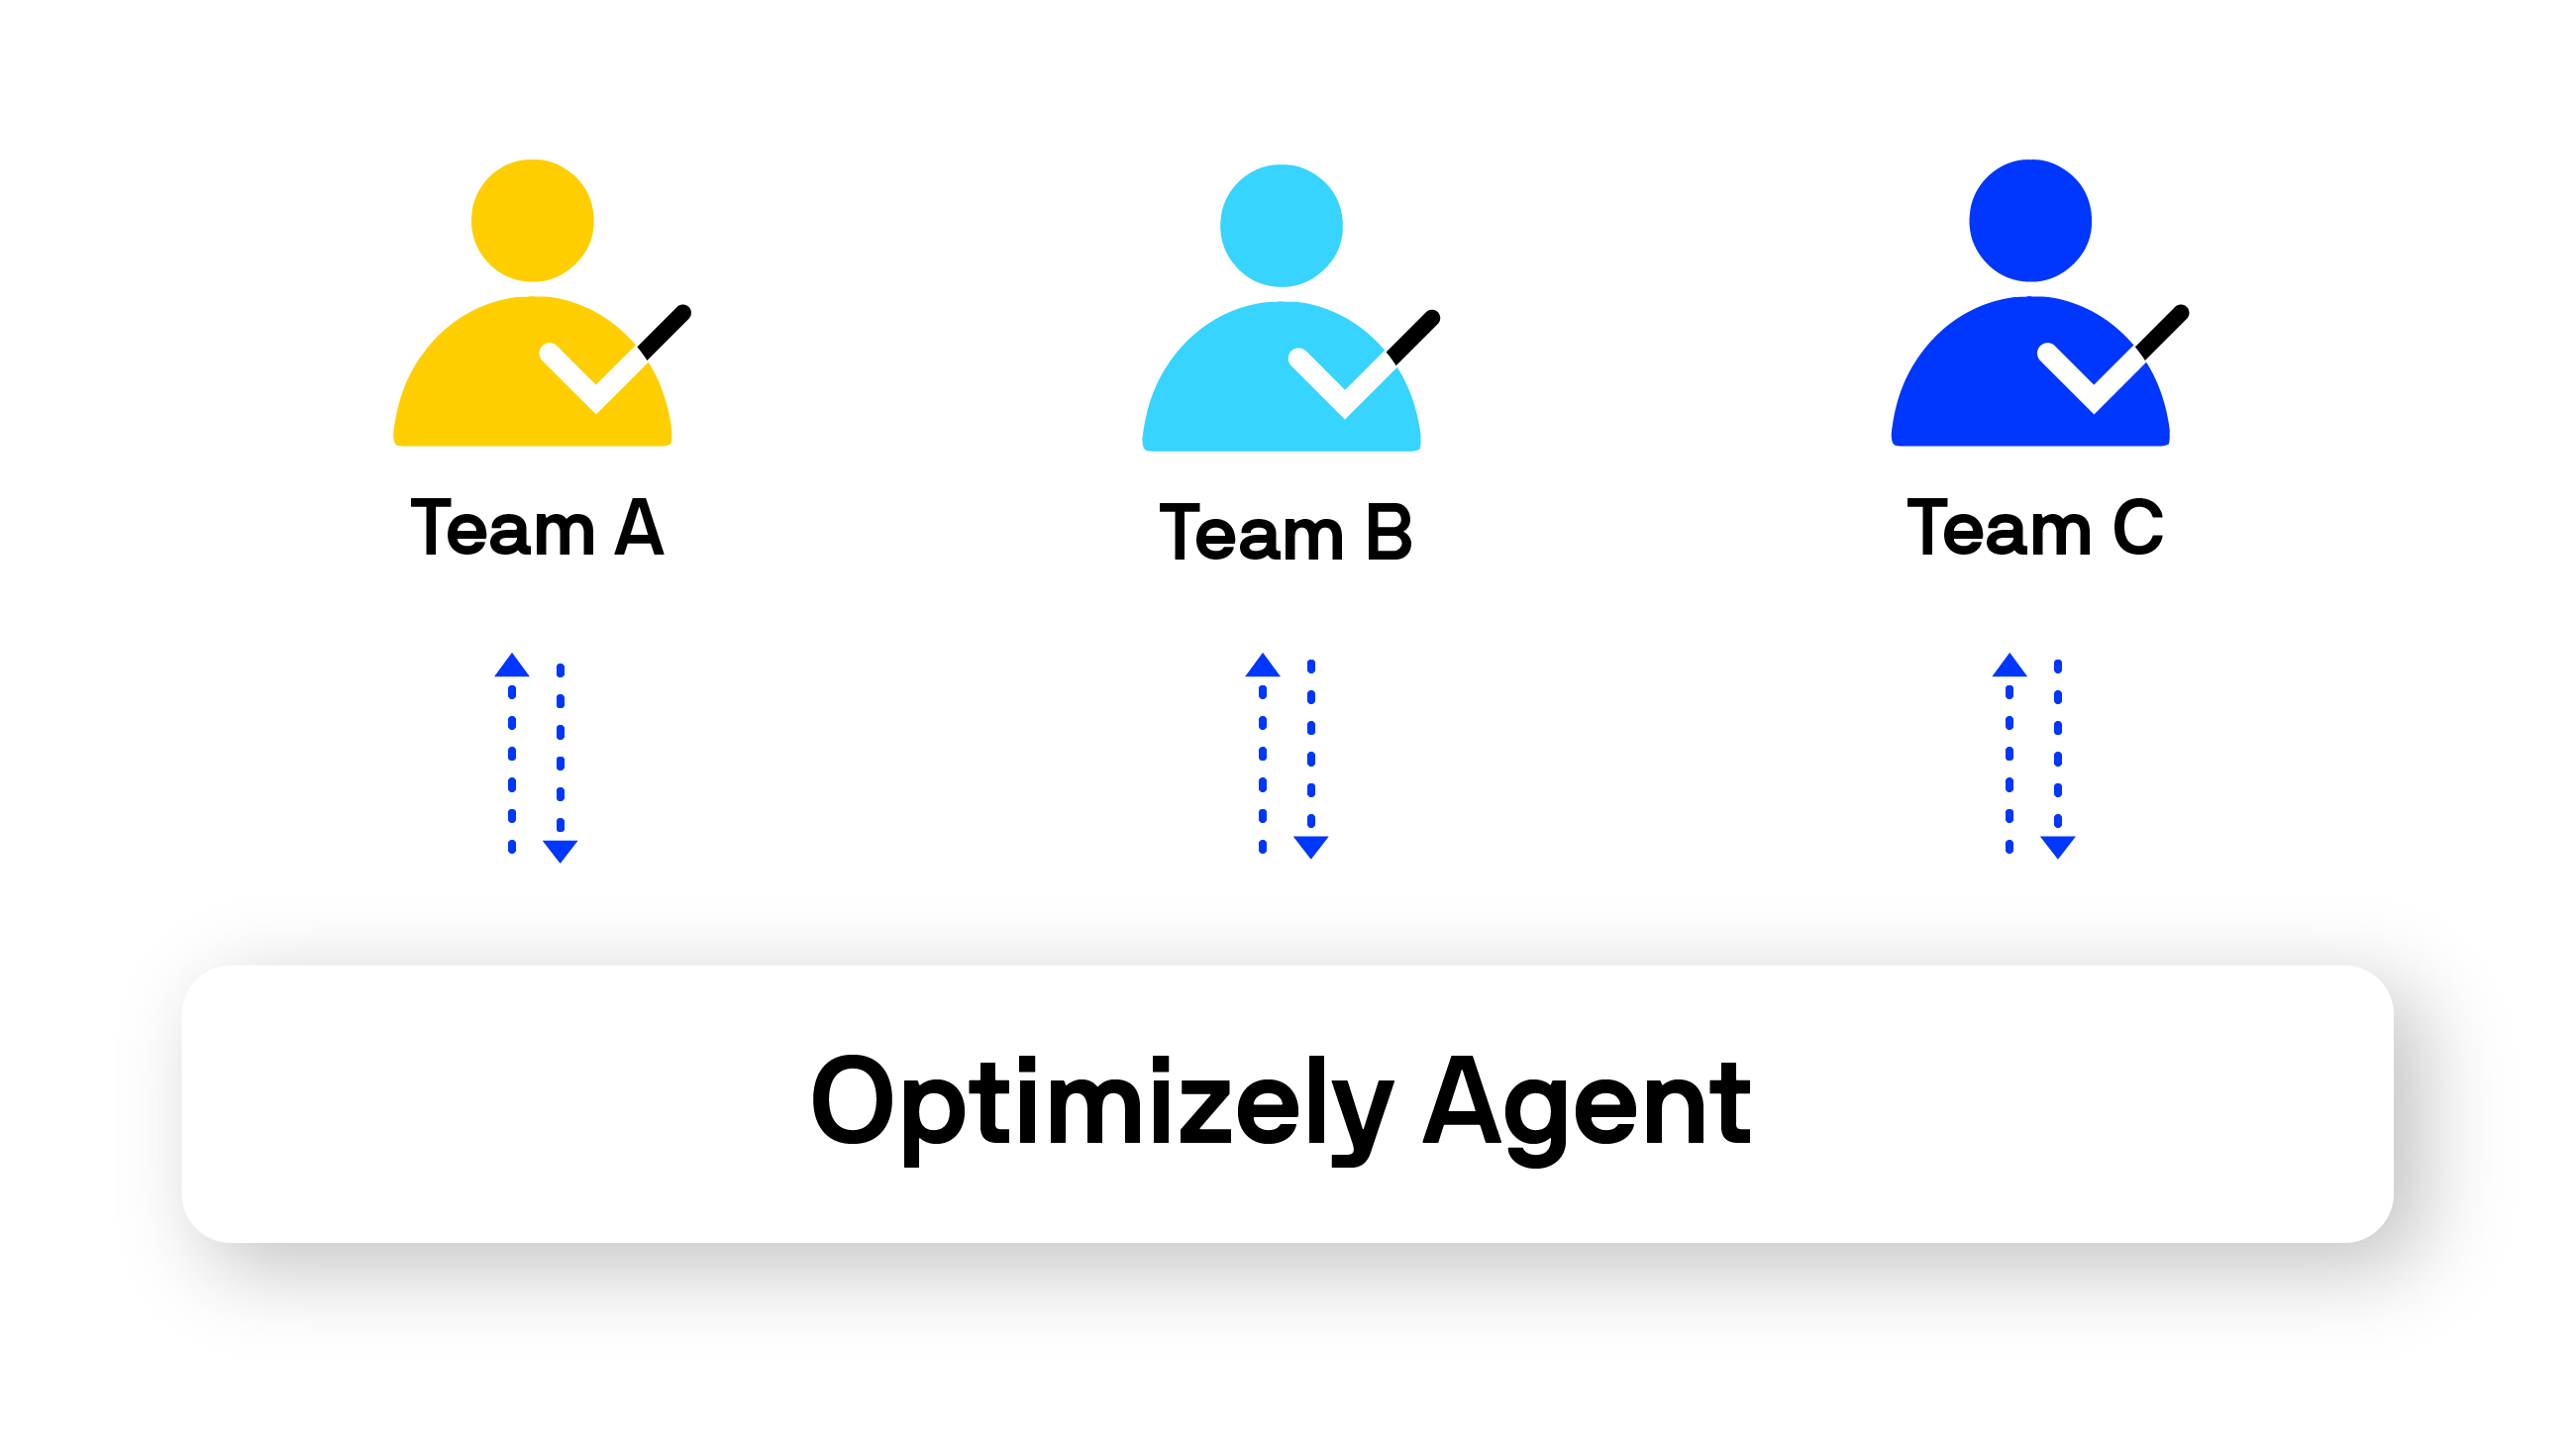 A diagram showing the central and standardized access to the Optimizely Agent service across an arbitrary number of teams.  
(Click to Enlarge)